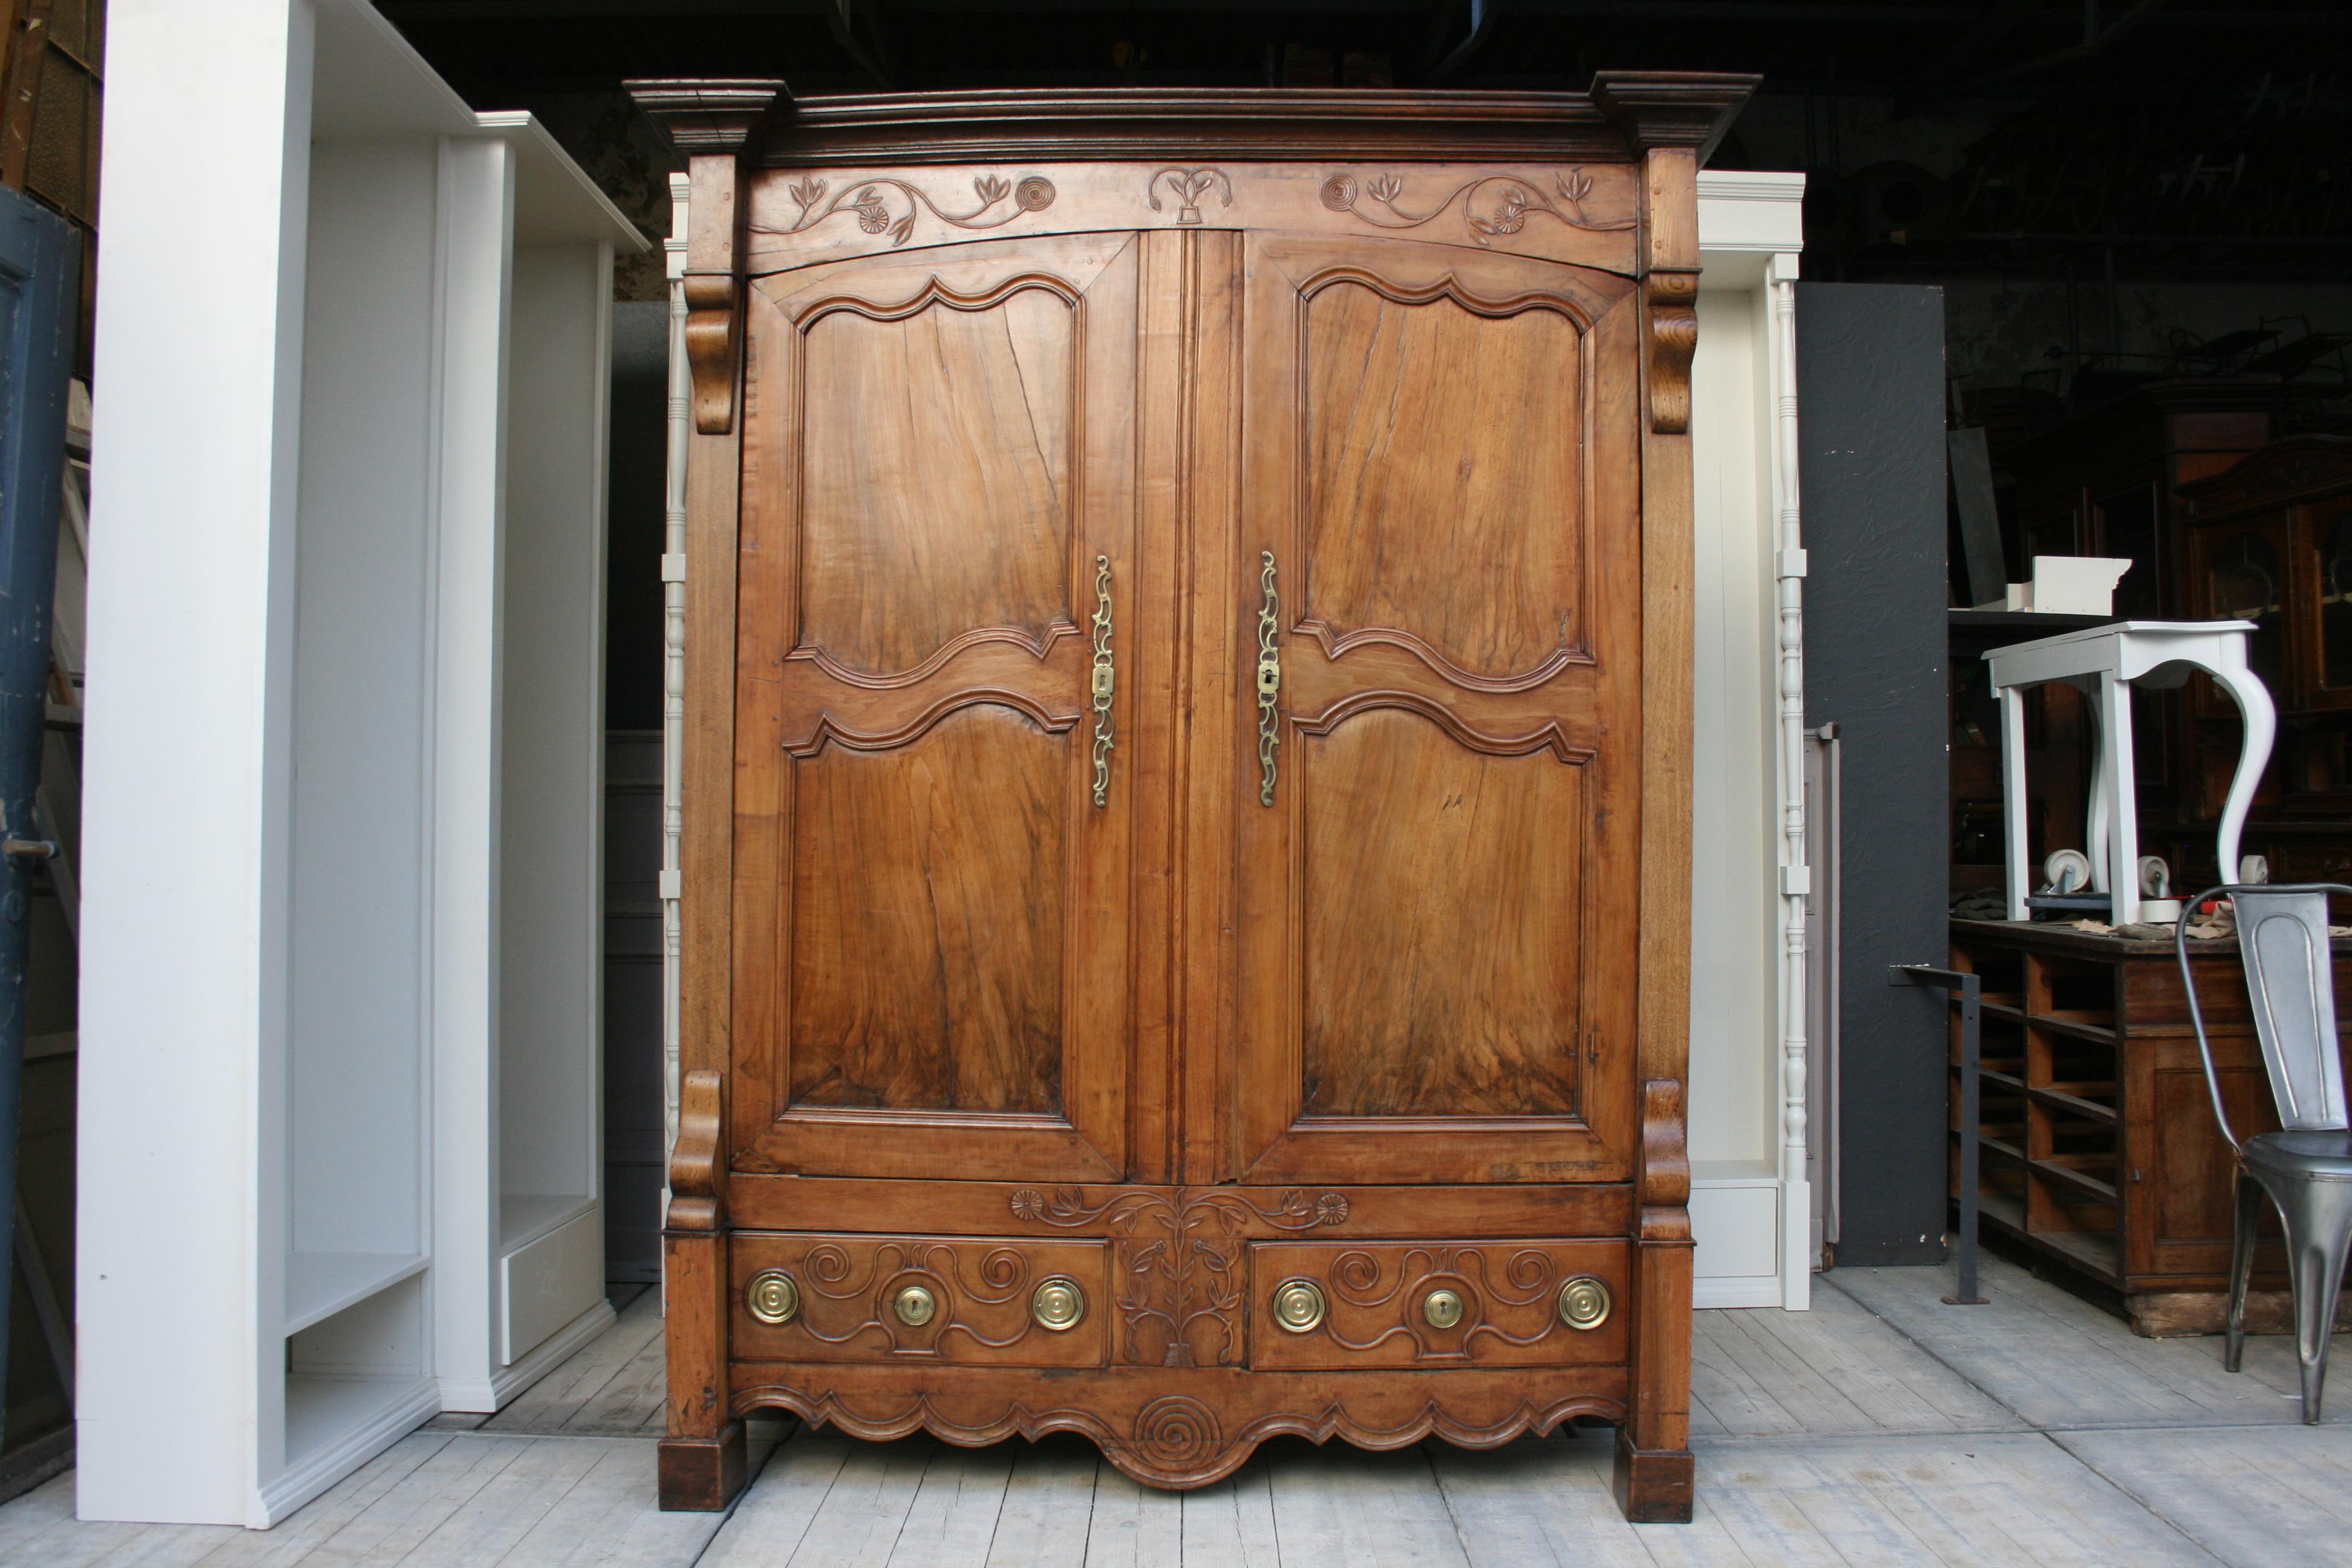 Beautiful antique French cabinet or wardrobe from the late 18th century.
Walnut front and oak body. Base with 2 